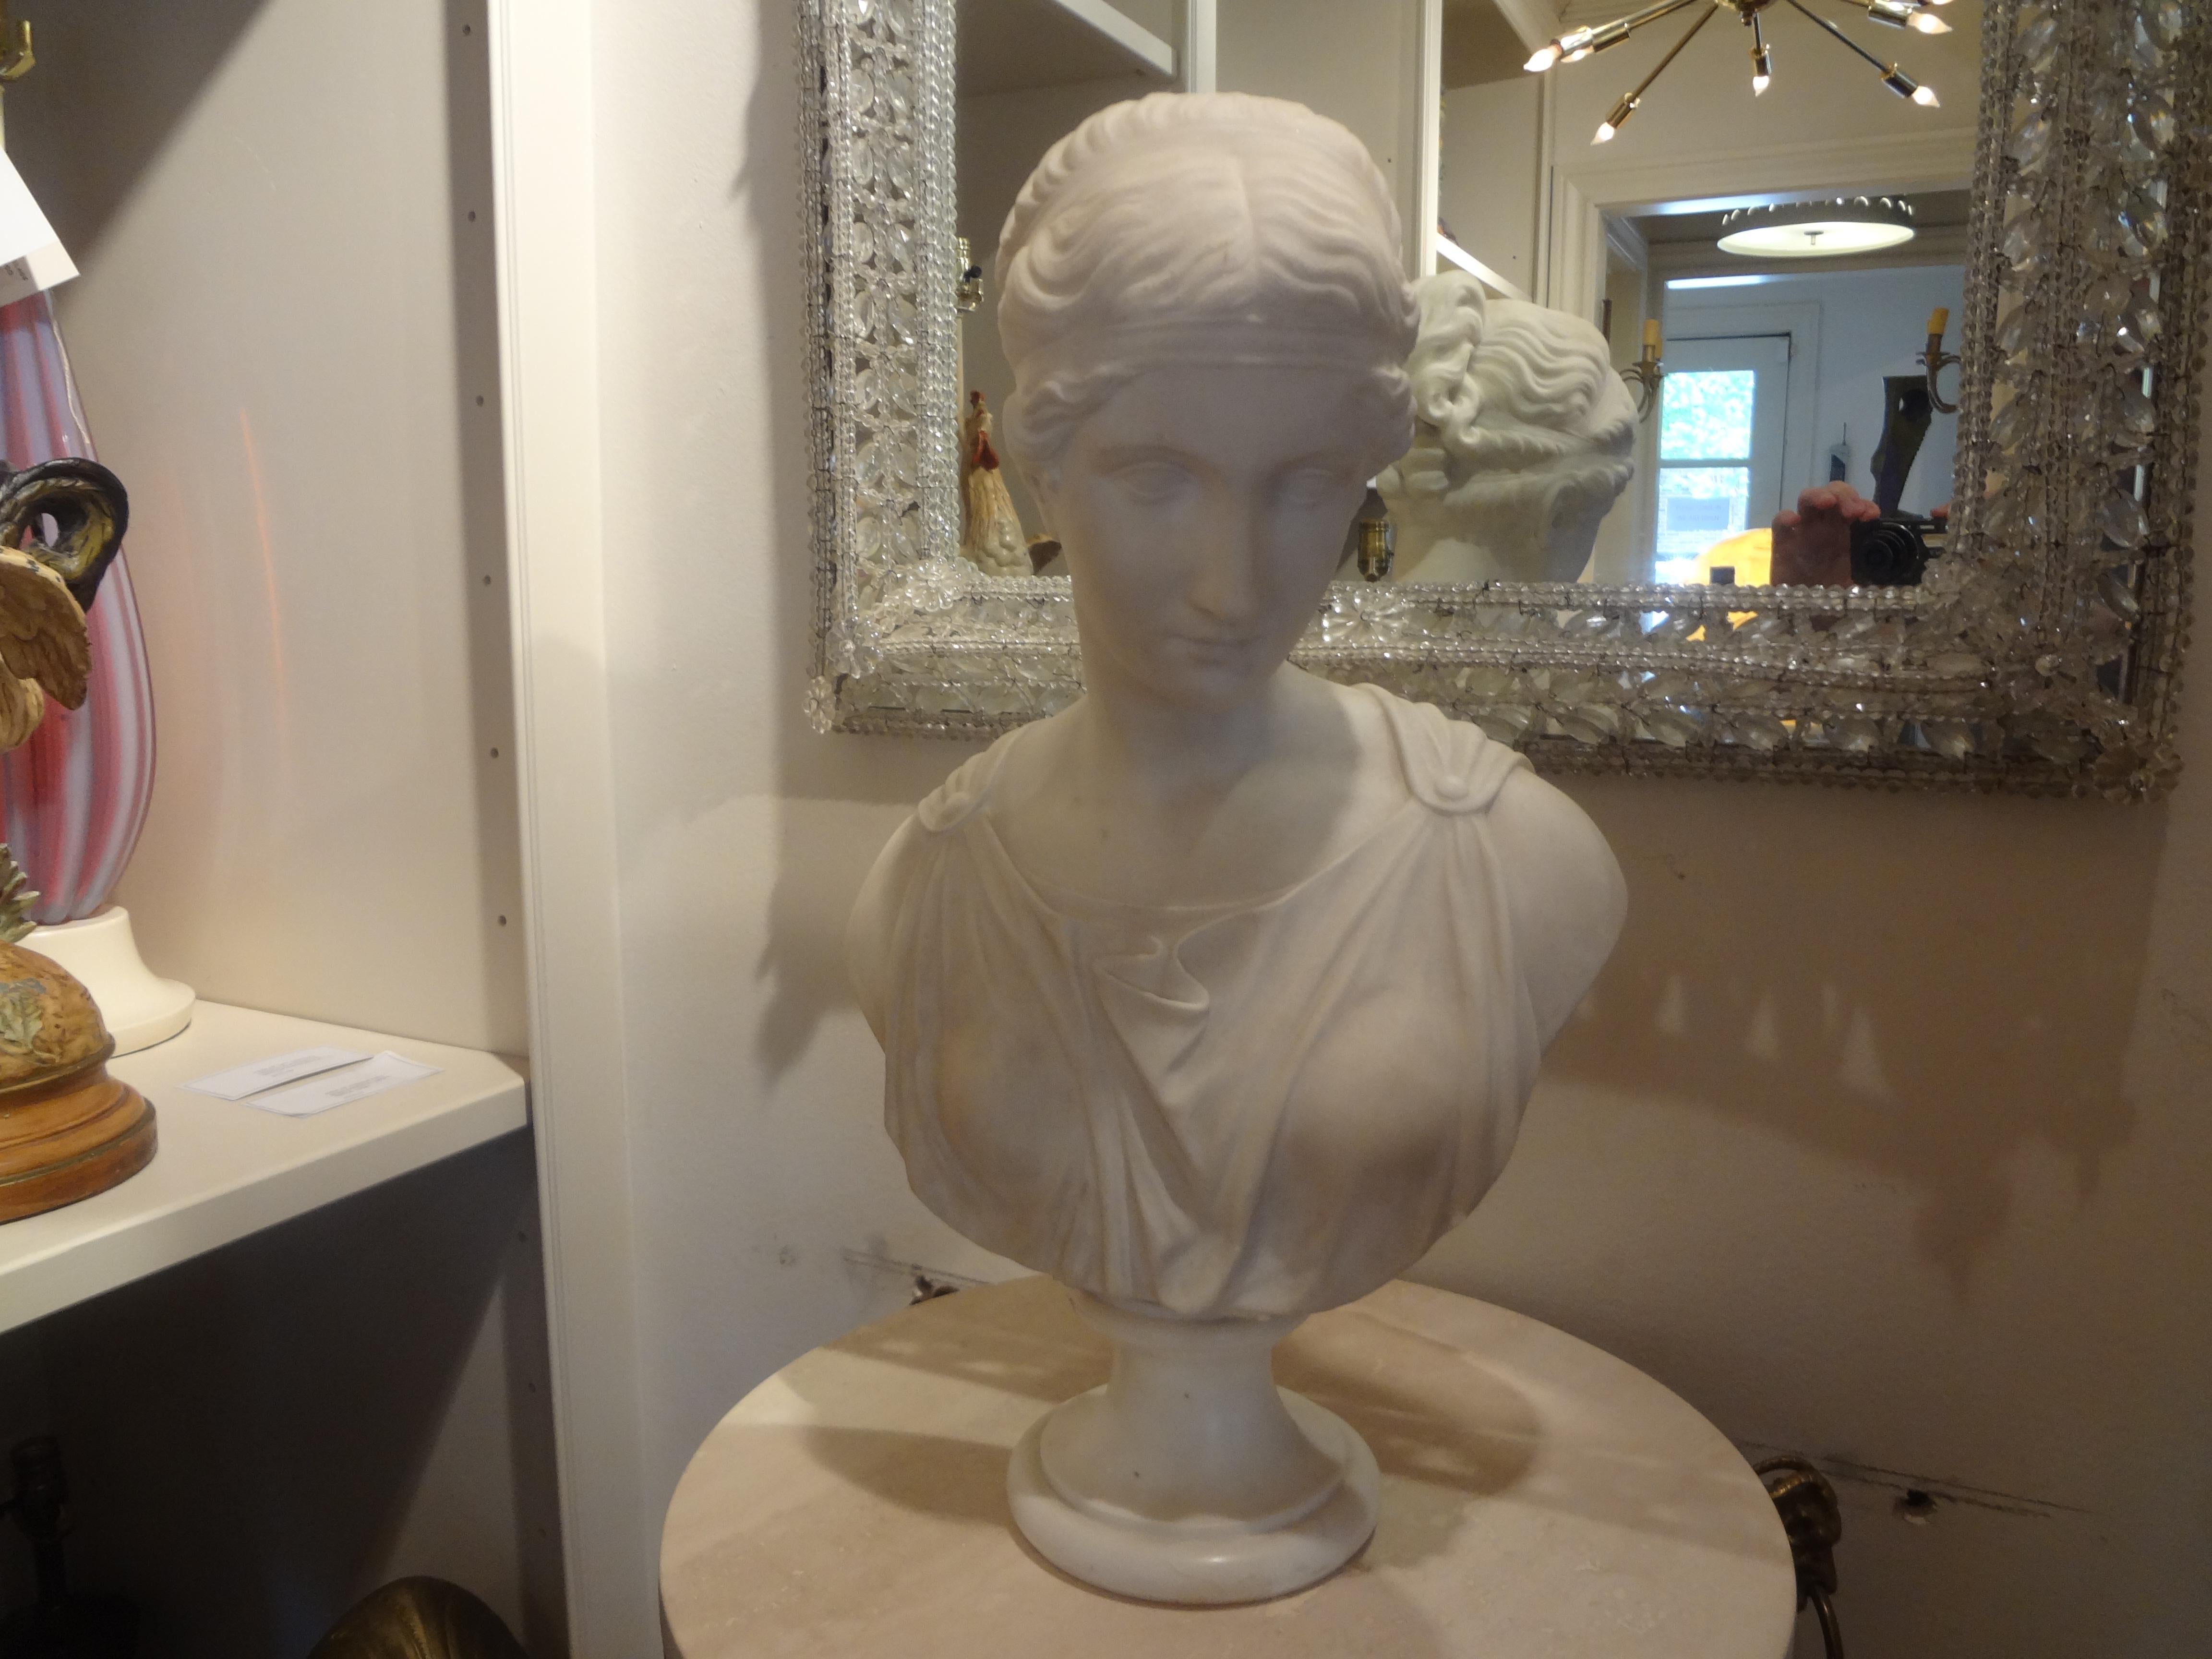 19th century Italian marble bust of Aphrodite. 
Our antique Italian Carrara marble bust of Aphrodite is expertly carved and rests on a round socle. This bust was perhaps a Grand Tour piece from the late 19th century.
Stunning!